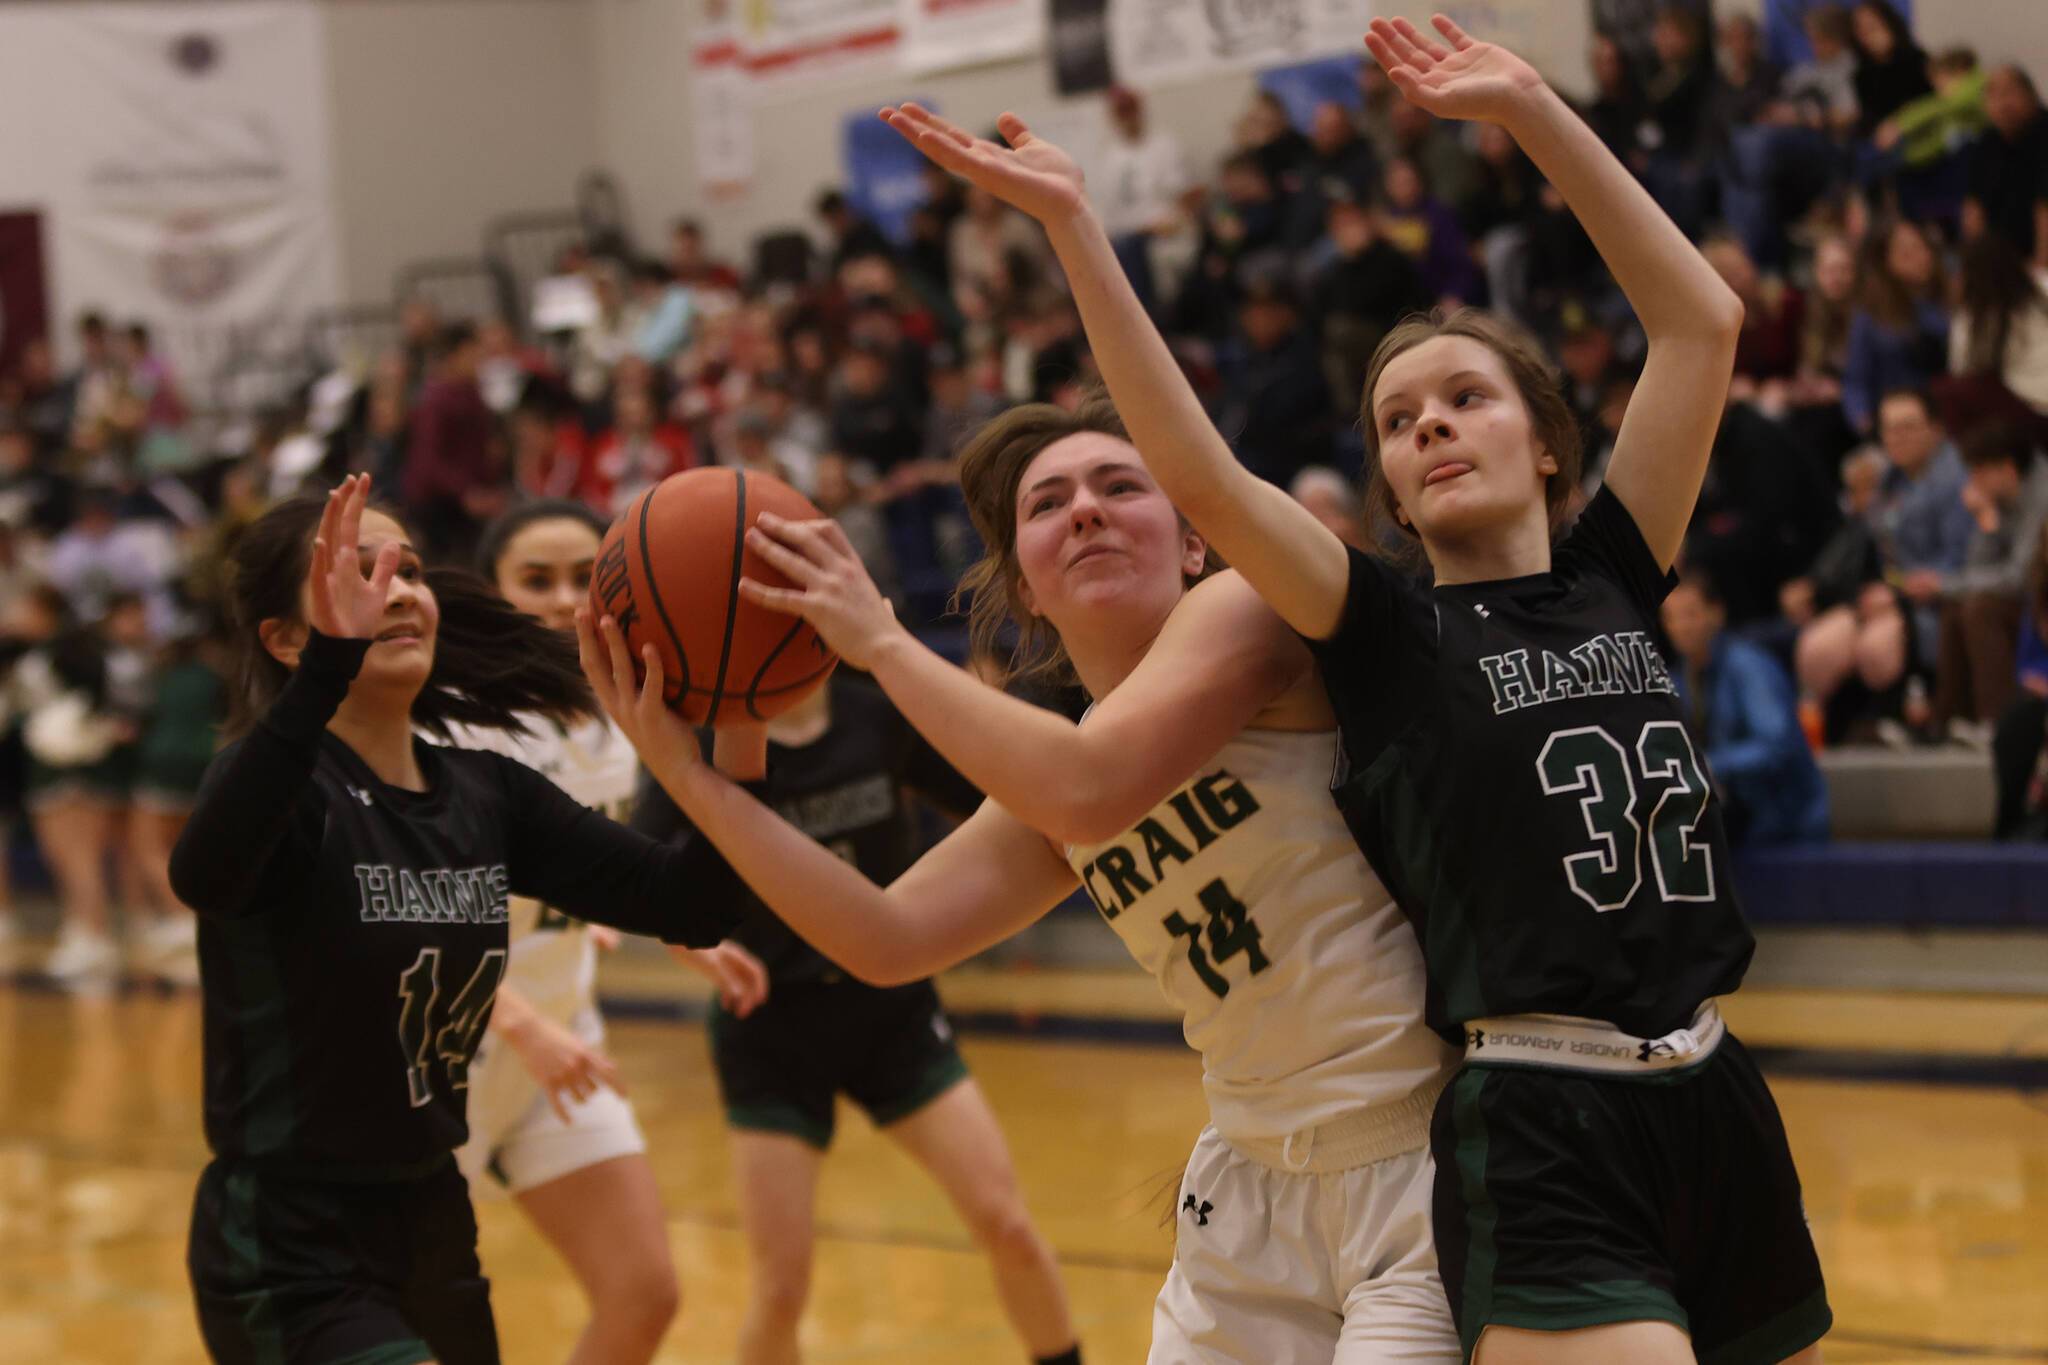 Craig senior Alissa Durgan (14) wills her way to the hoop while defended by Haines sophomore Ashlyn Ganey (32) and Haines senior Alison Benda (14) in the second half of a Craig win in the first round of the Region V 2A Tournament. (Ben Hohenstatt / Juneau Empire)